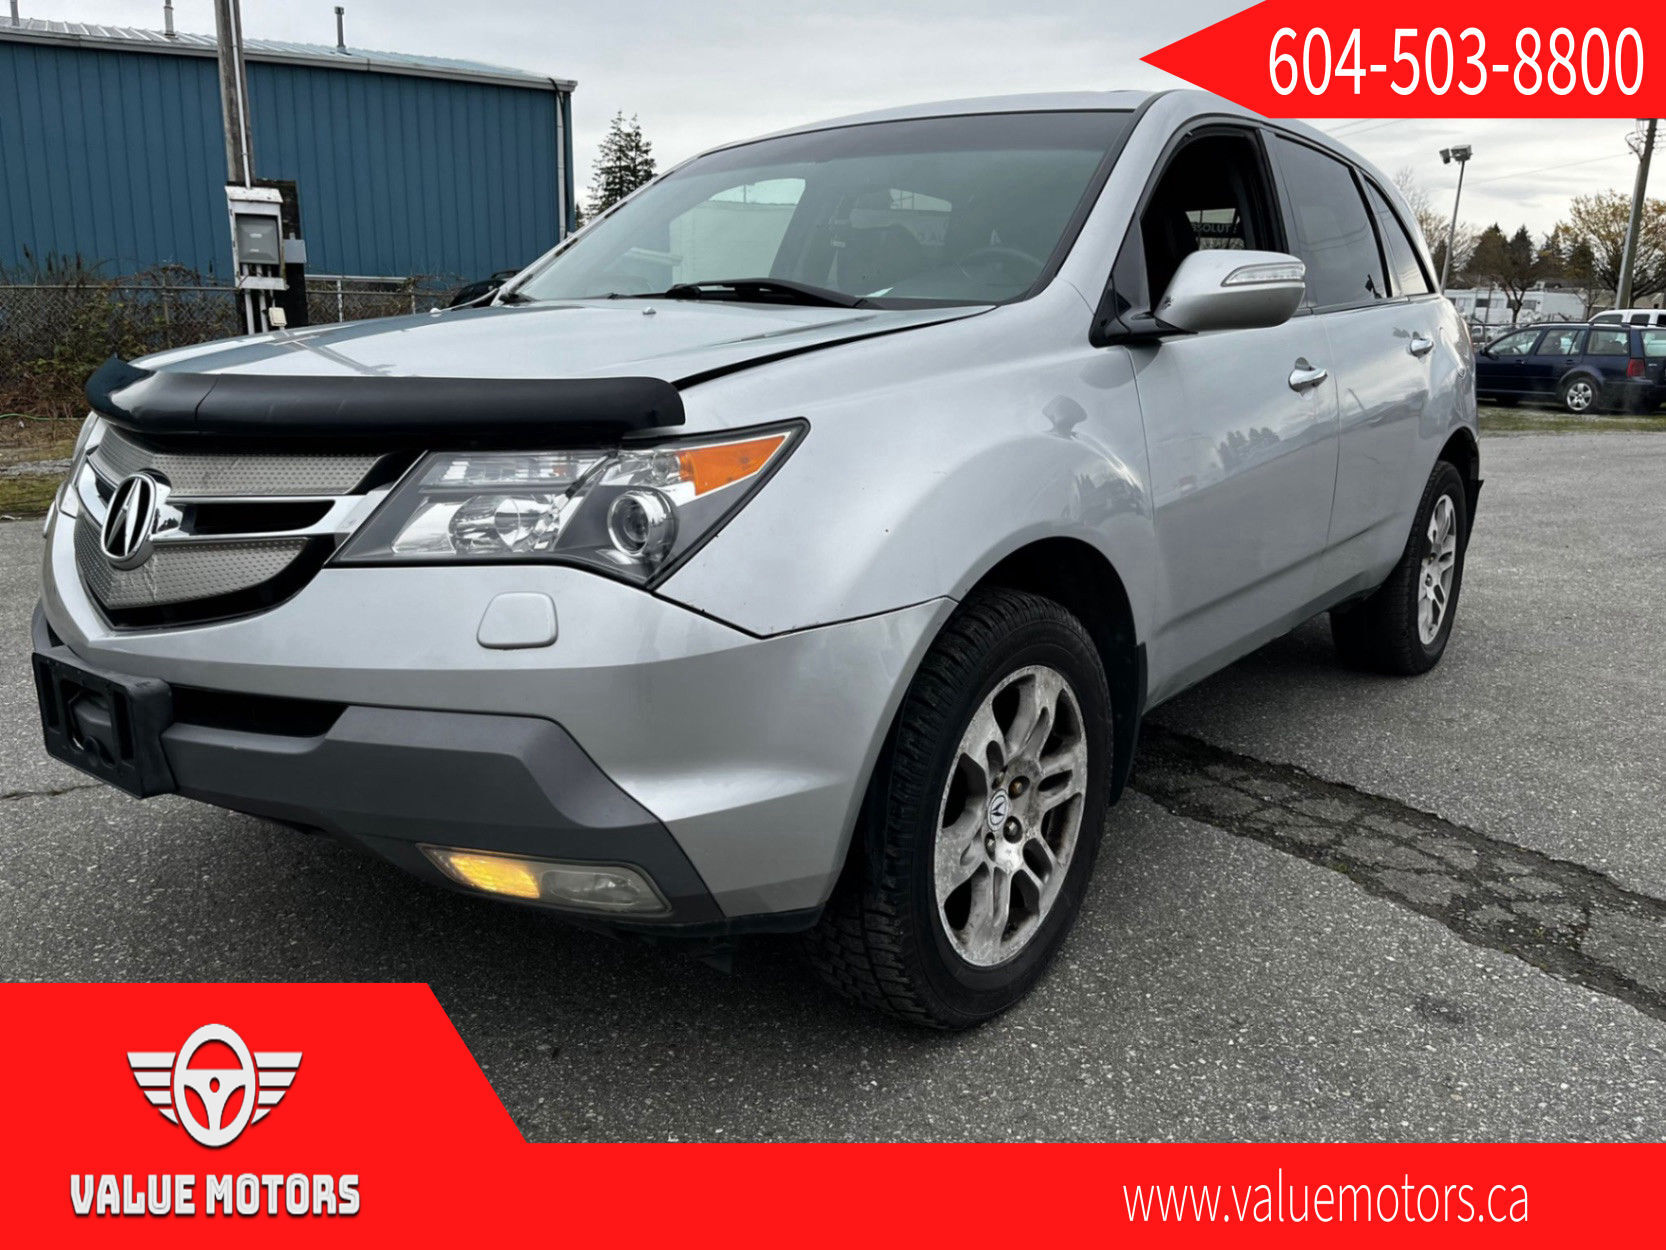 2007 Acura MDX 4WD 4dr